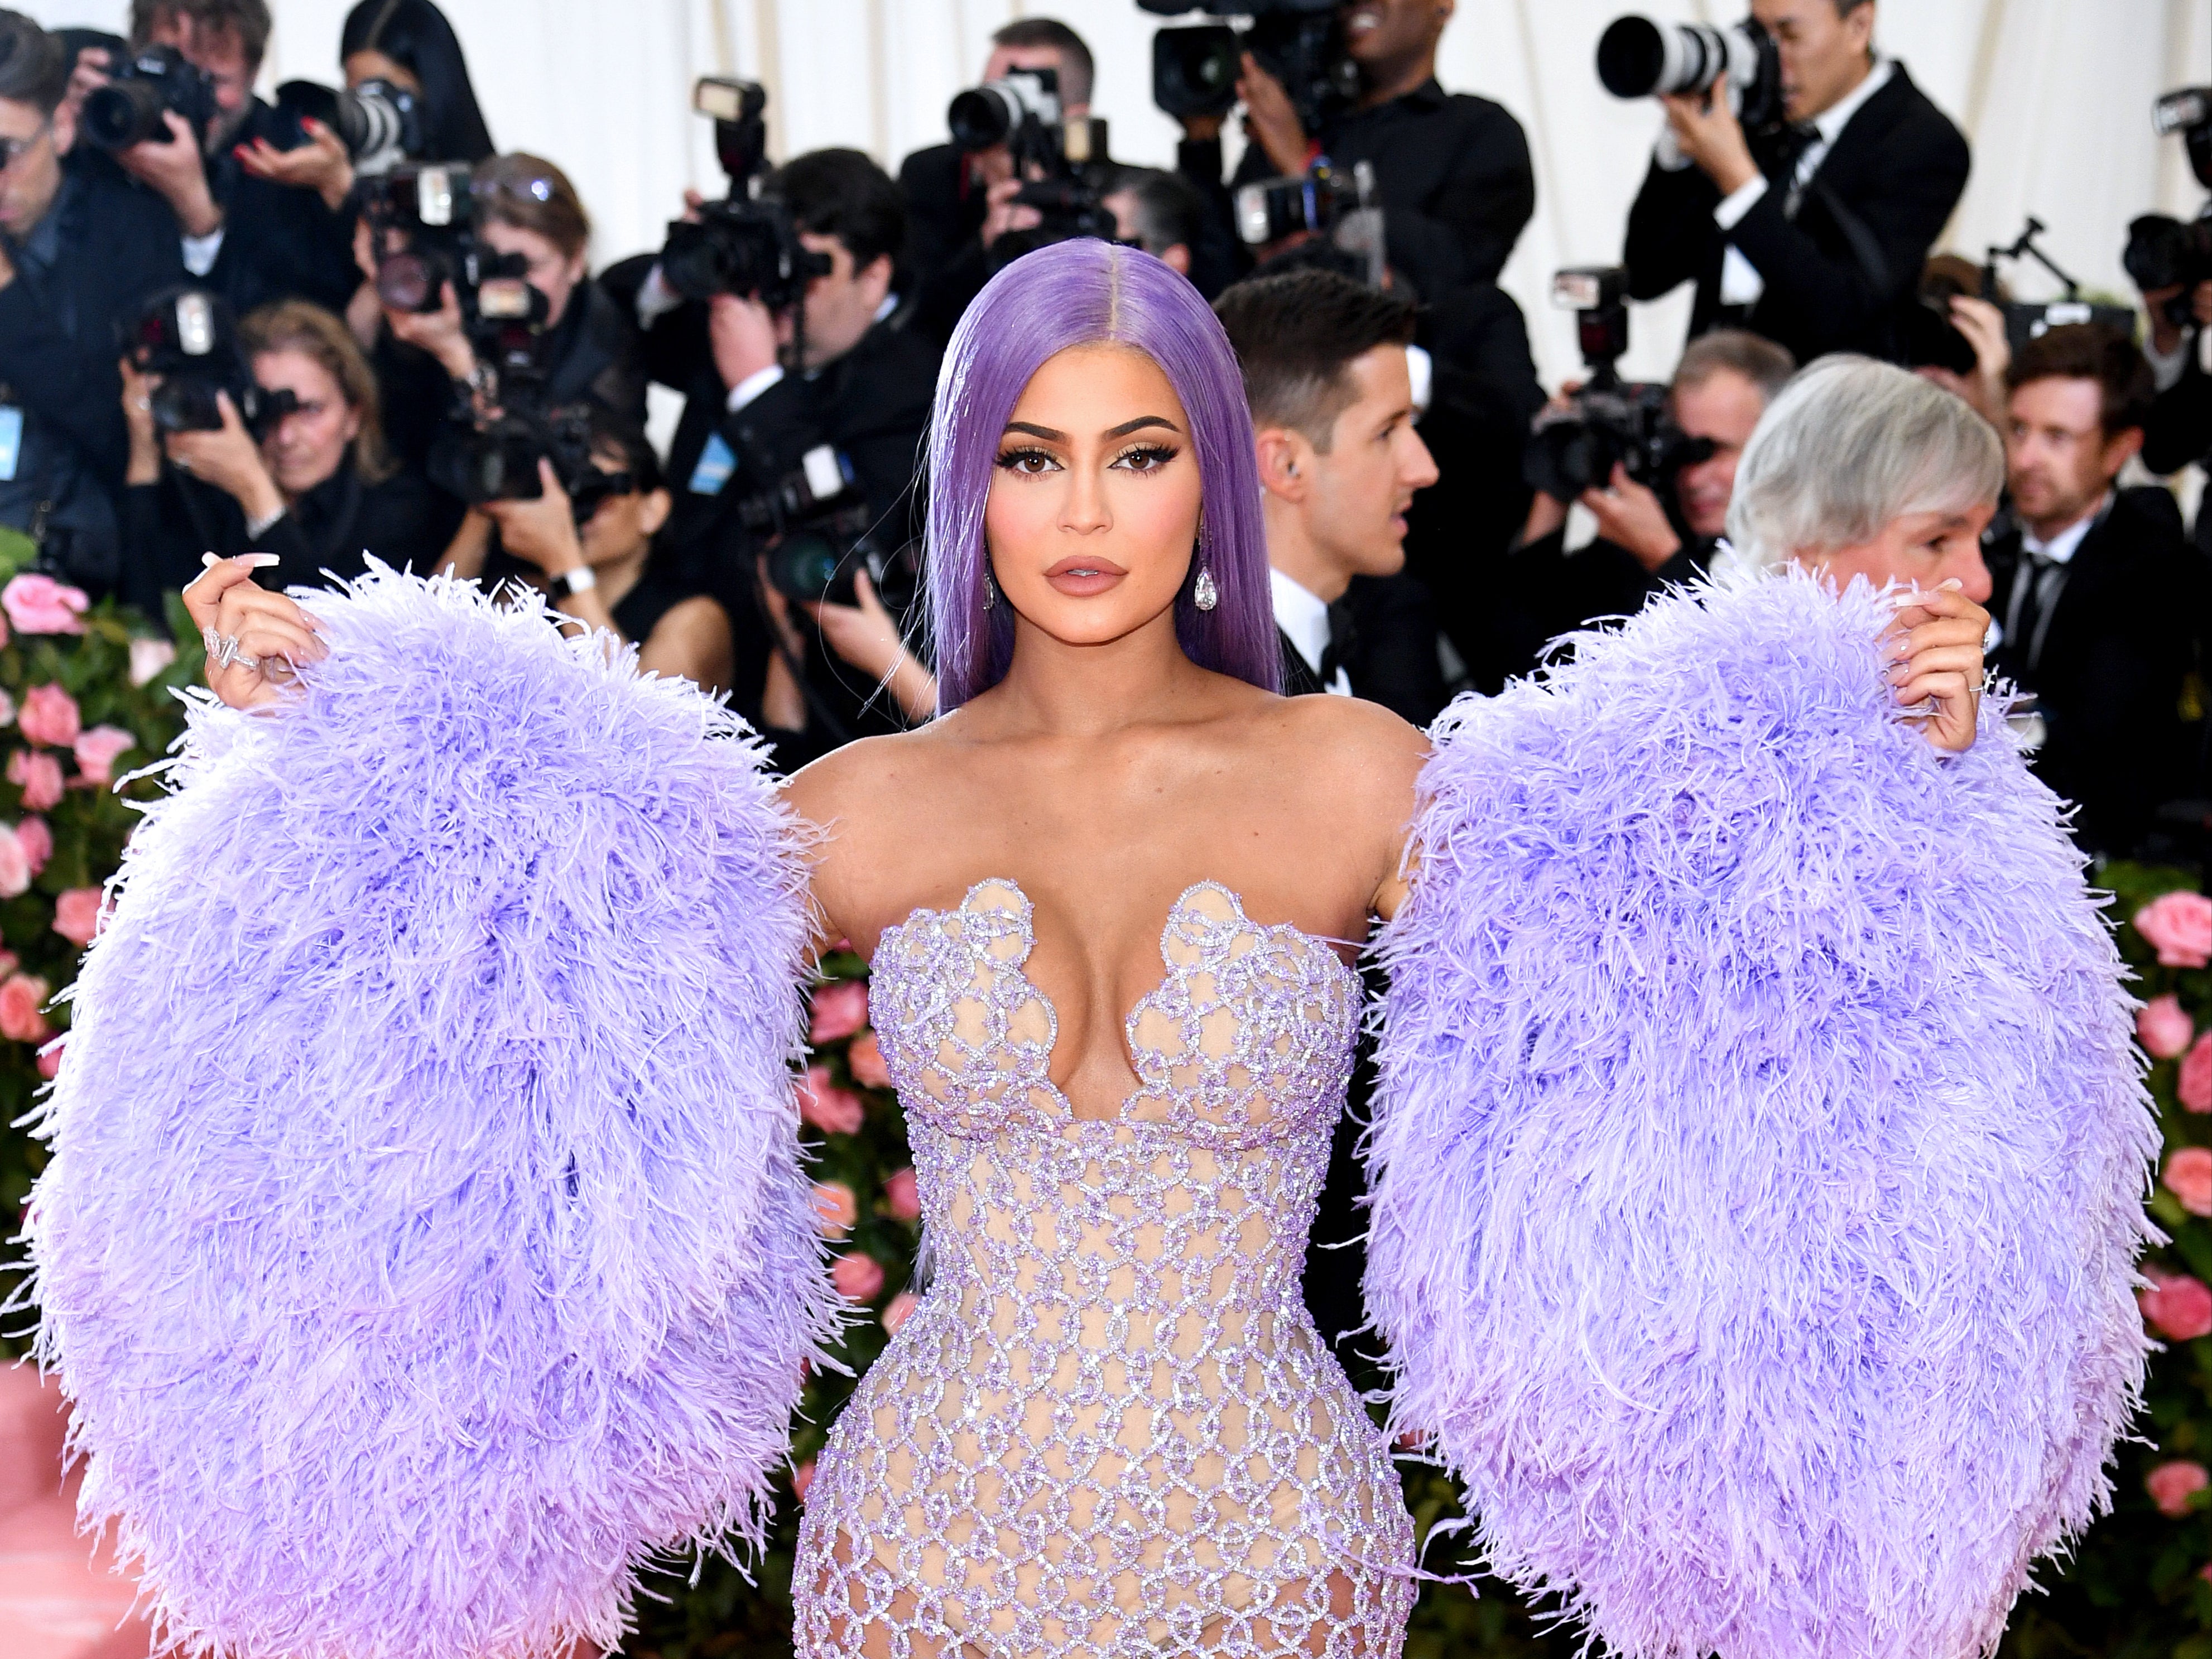 Kylie Jenner confirms she won’t be attending 2021 Met Gala